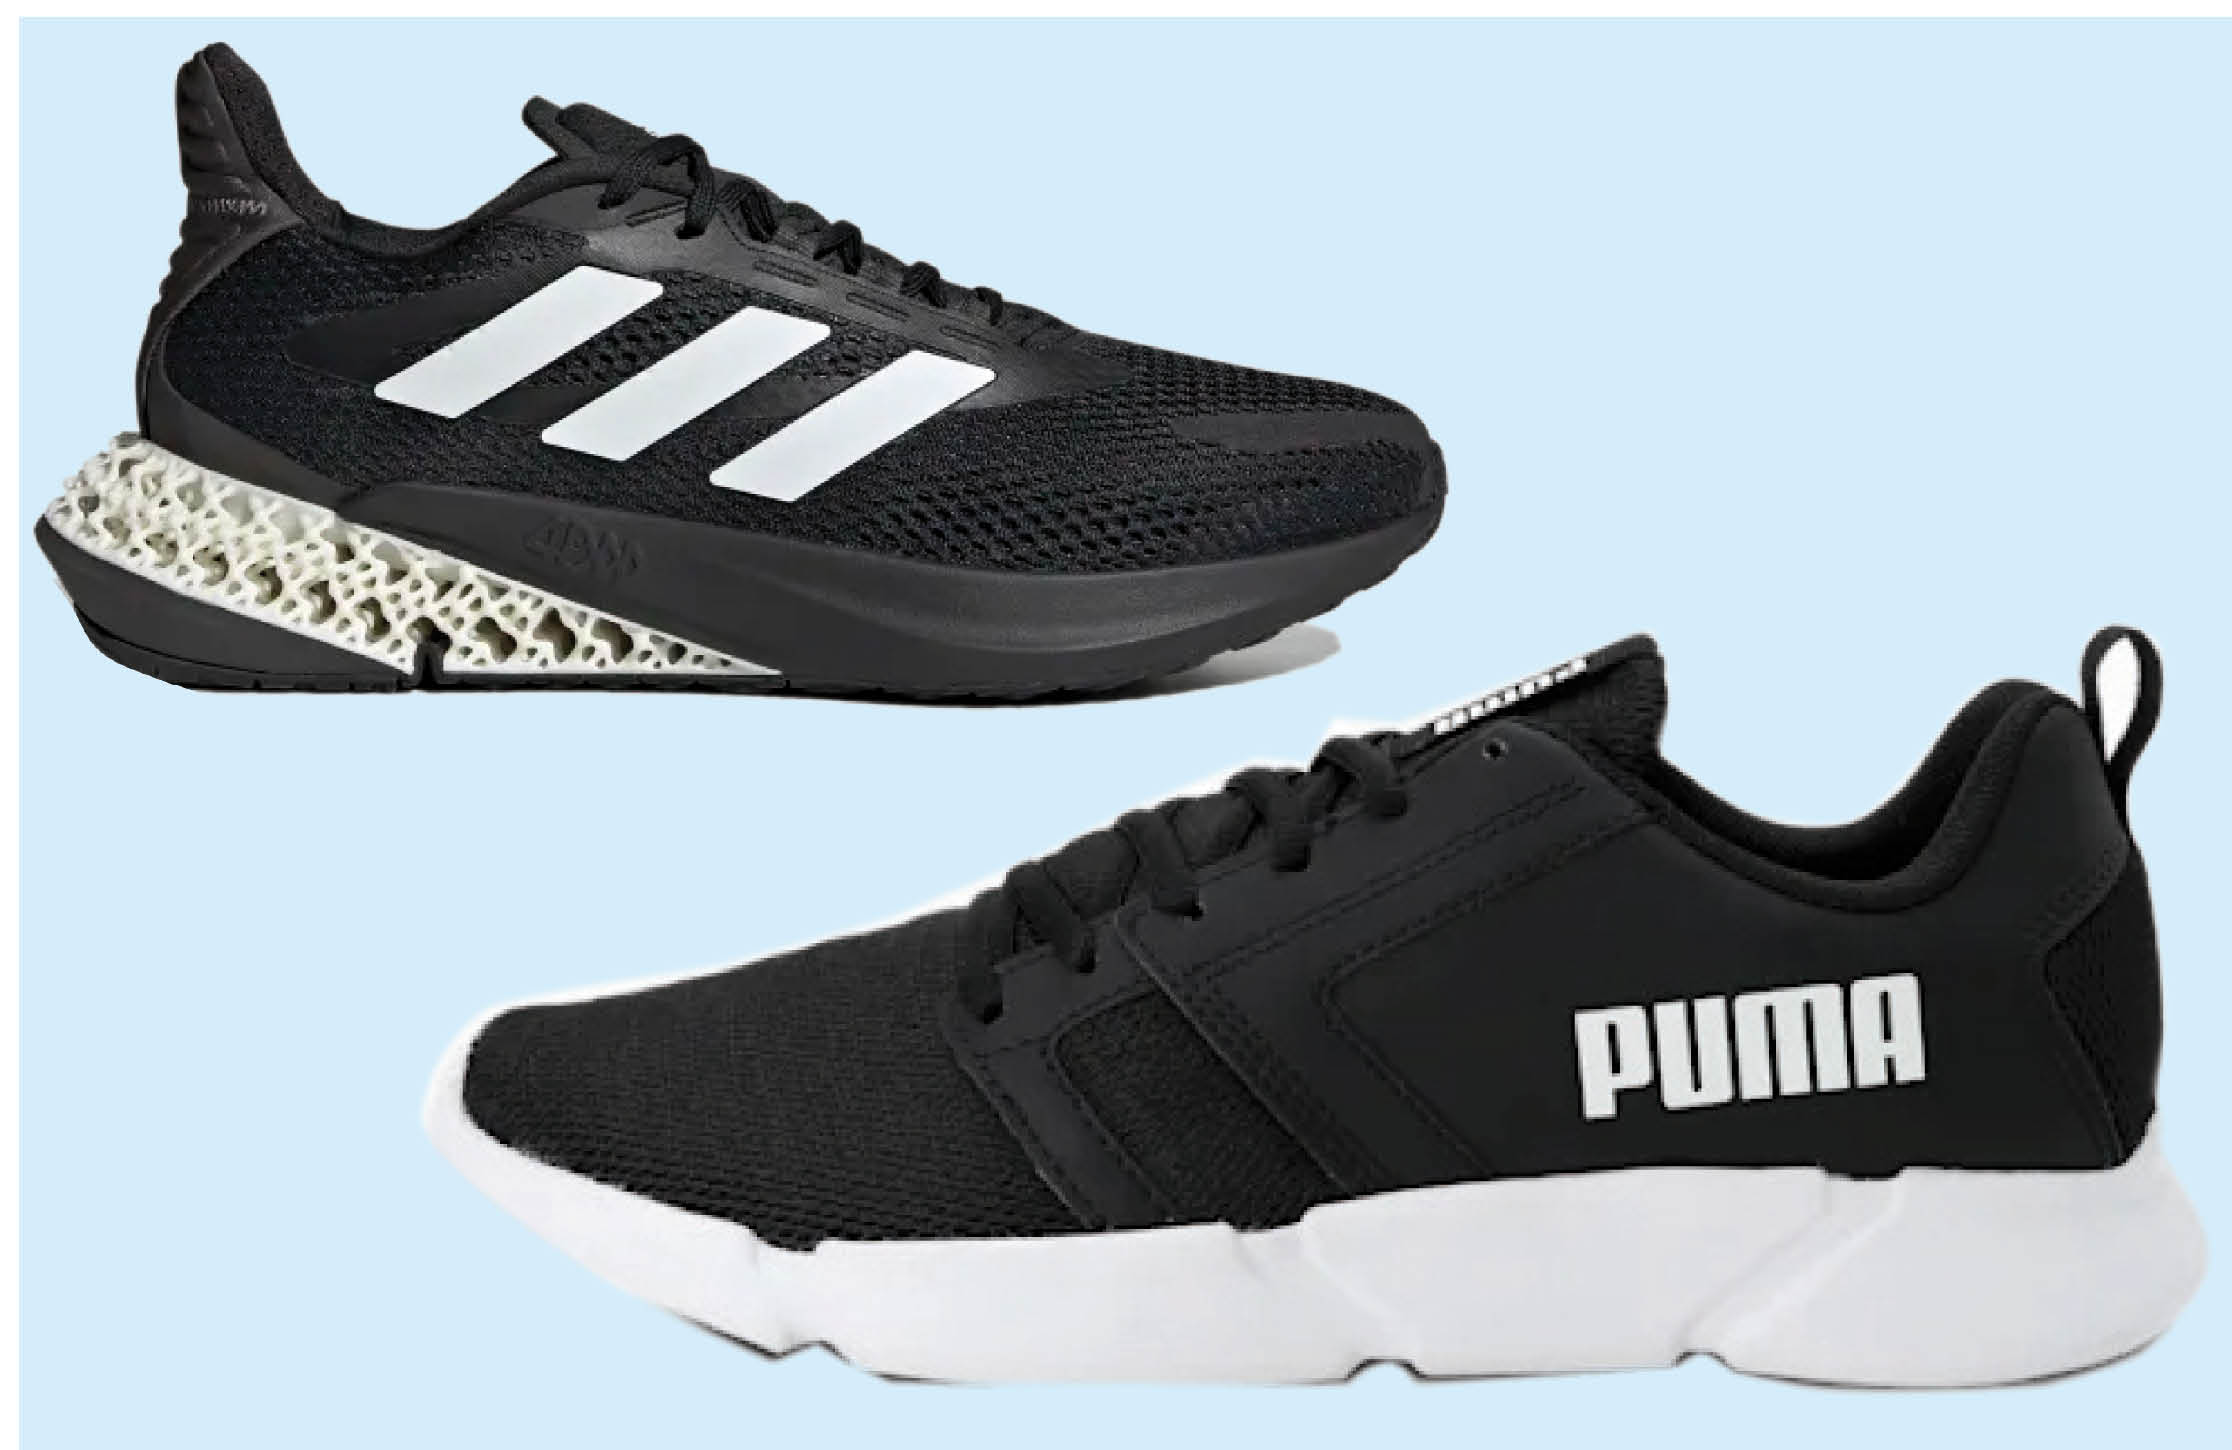 Puma and Adidas were founded by brothers - India Retailing